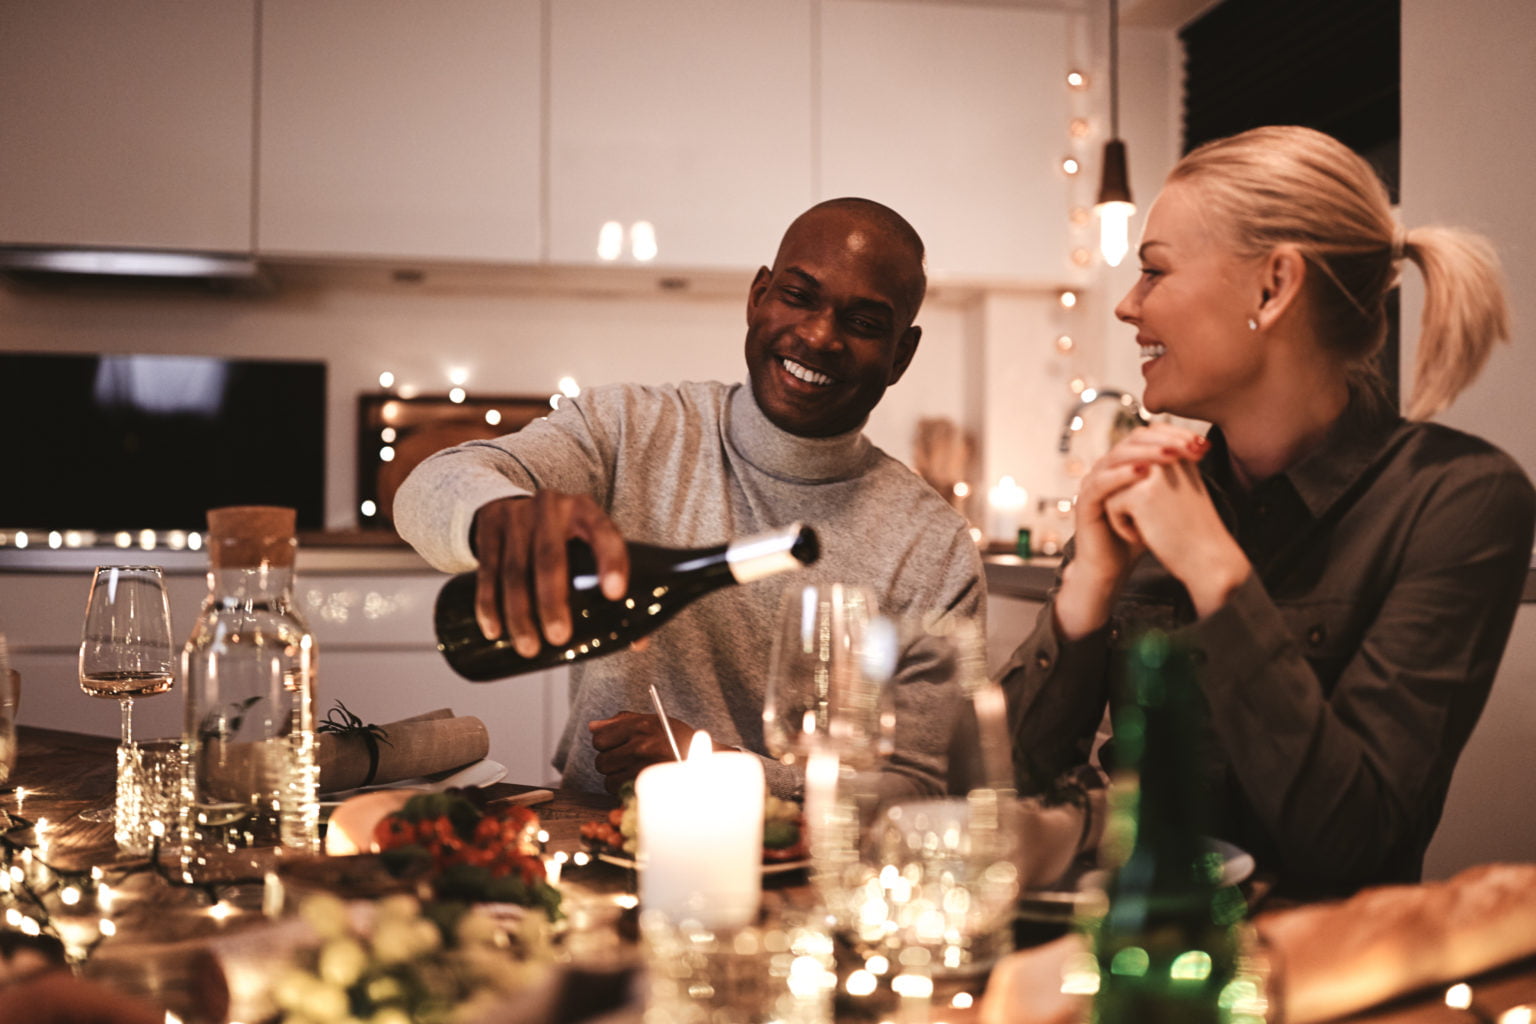 Smiling man pouring friends wine during a dinner party